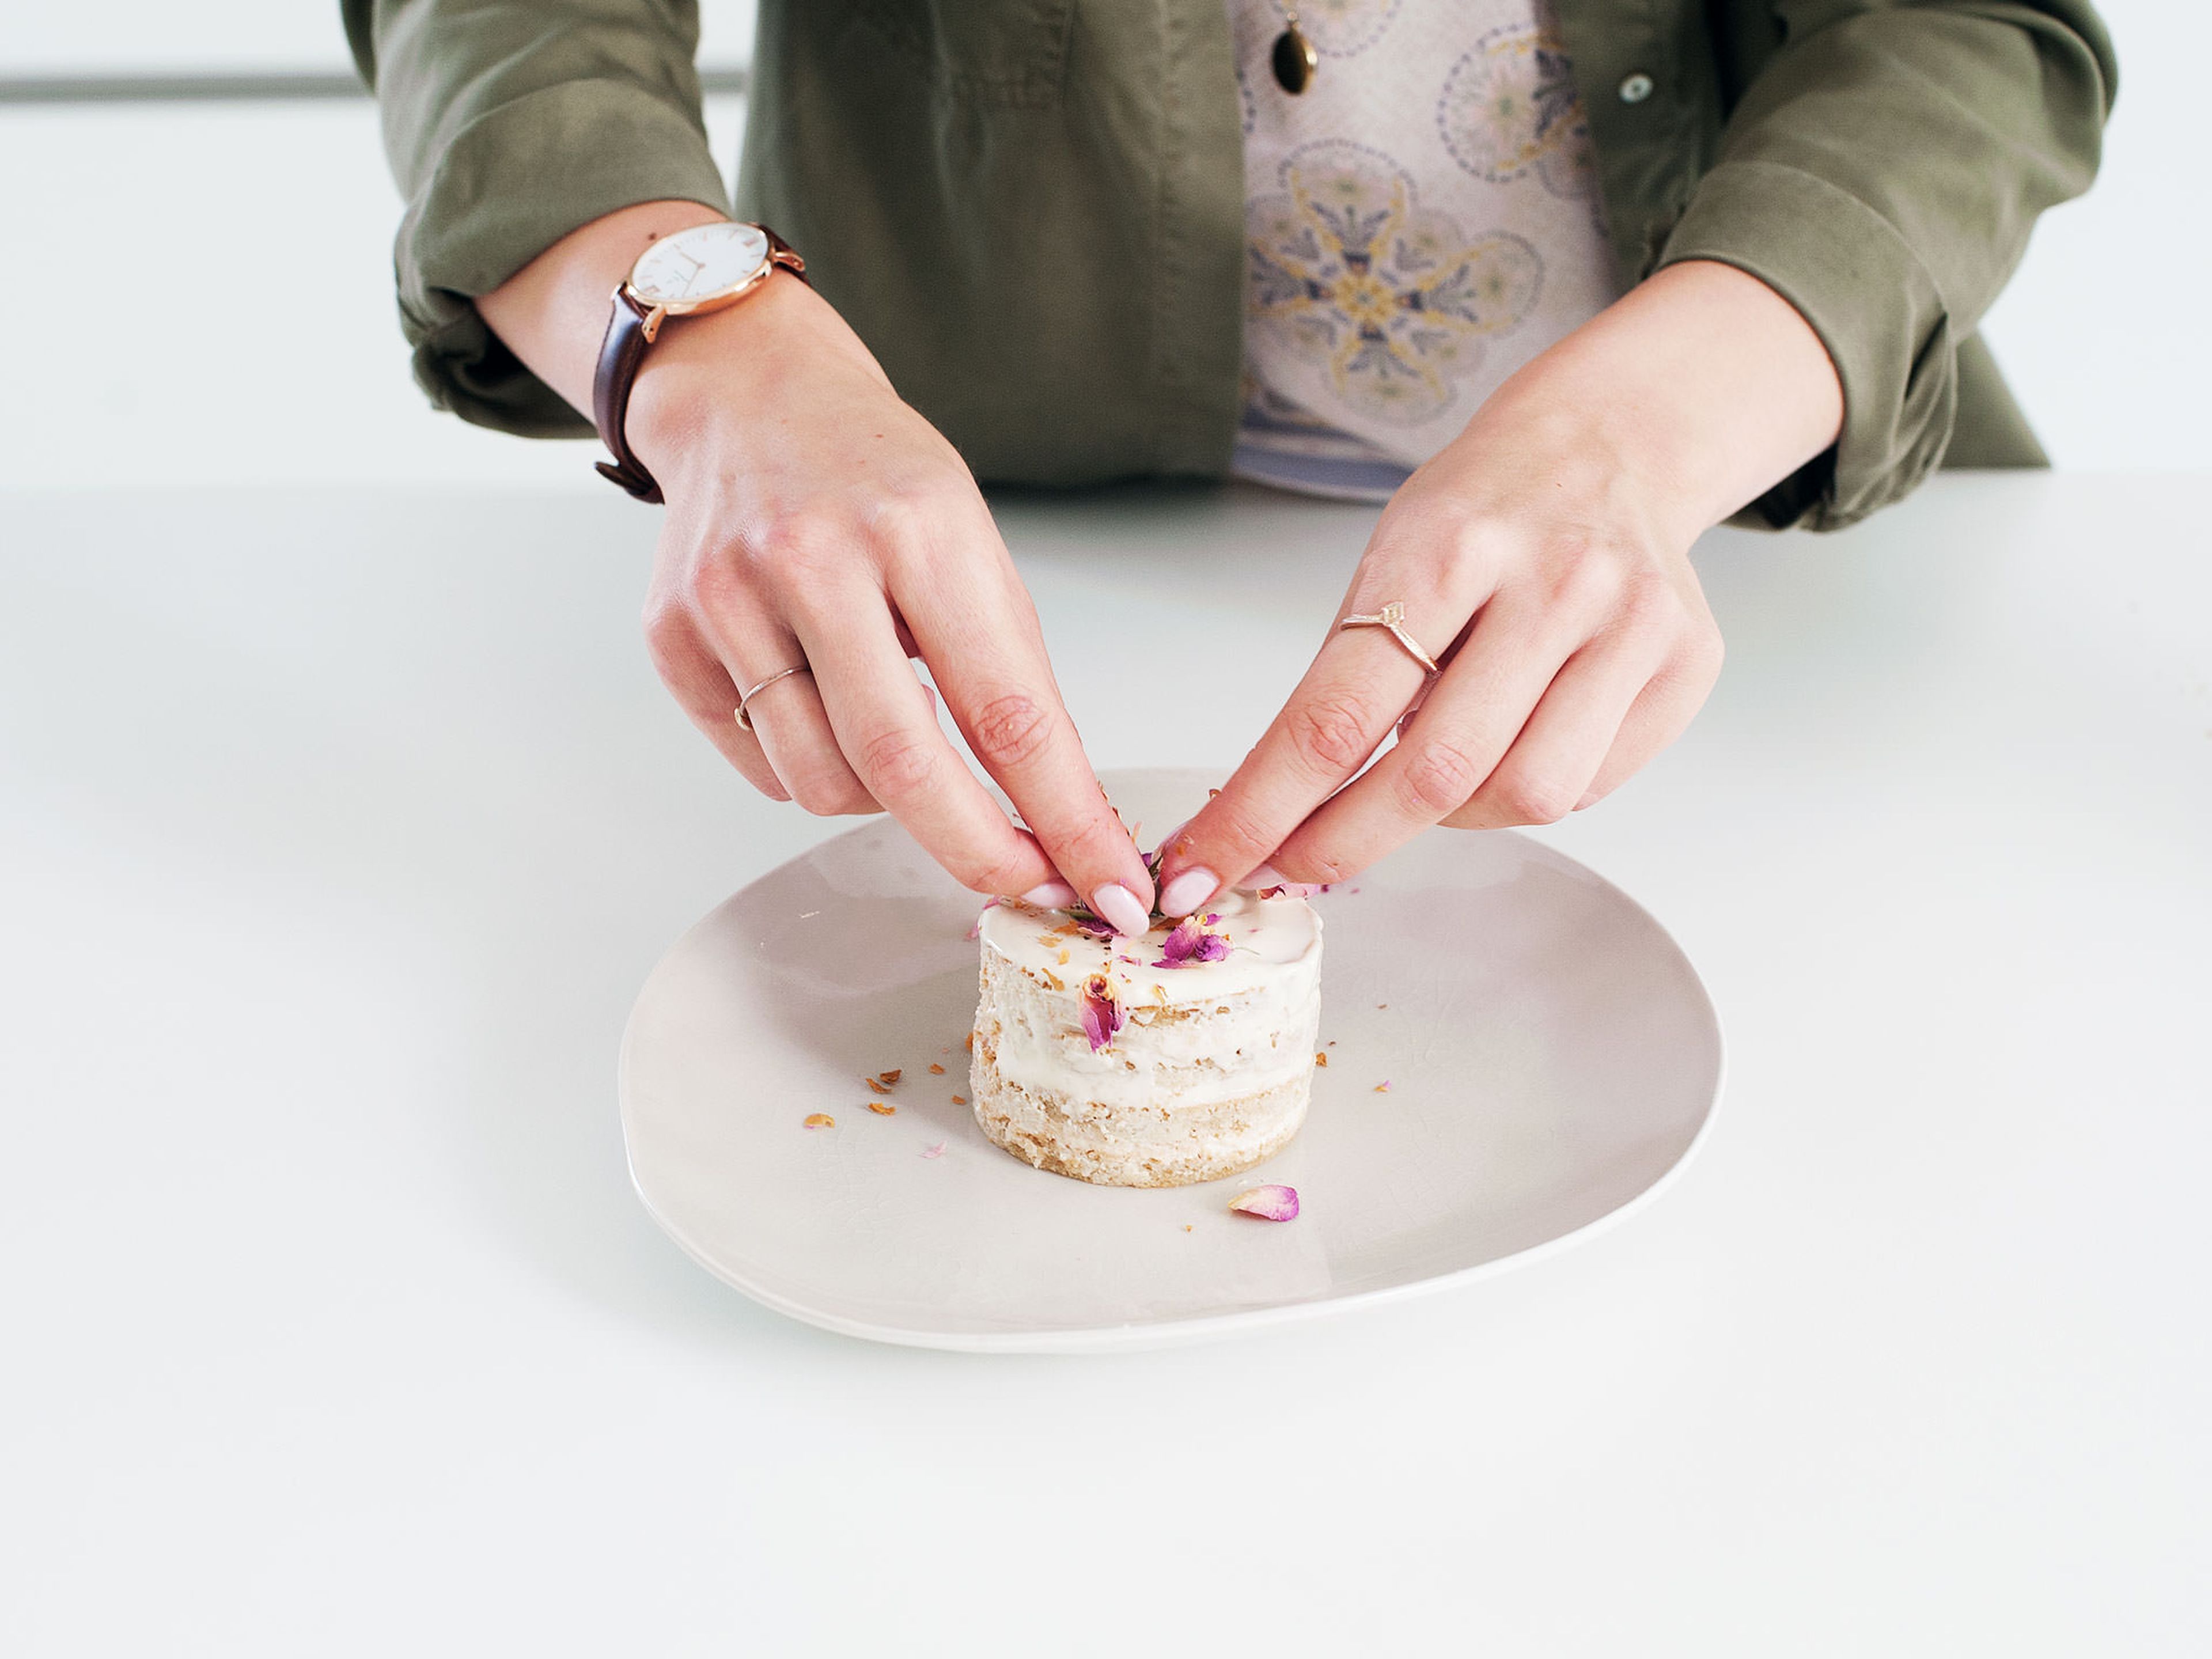 Carefully loosen the cakes from their rings, using a small knife, if needed. Spread the remaining cream on top of each cake and, if you like, on the sides of the gateaux. Top with dried rosebuds.